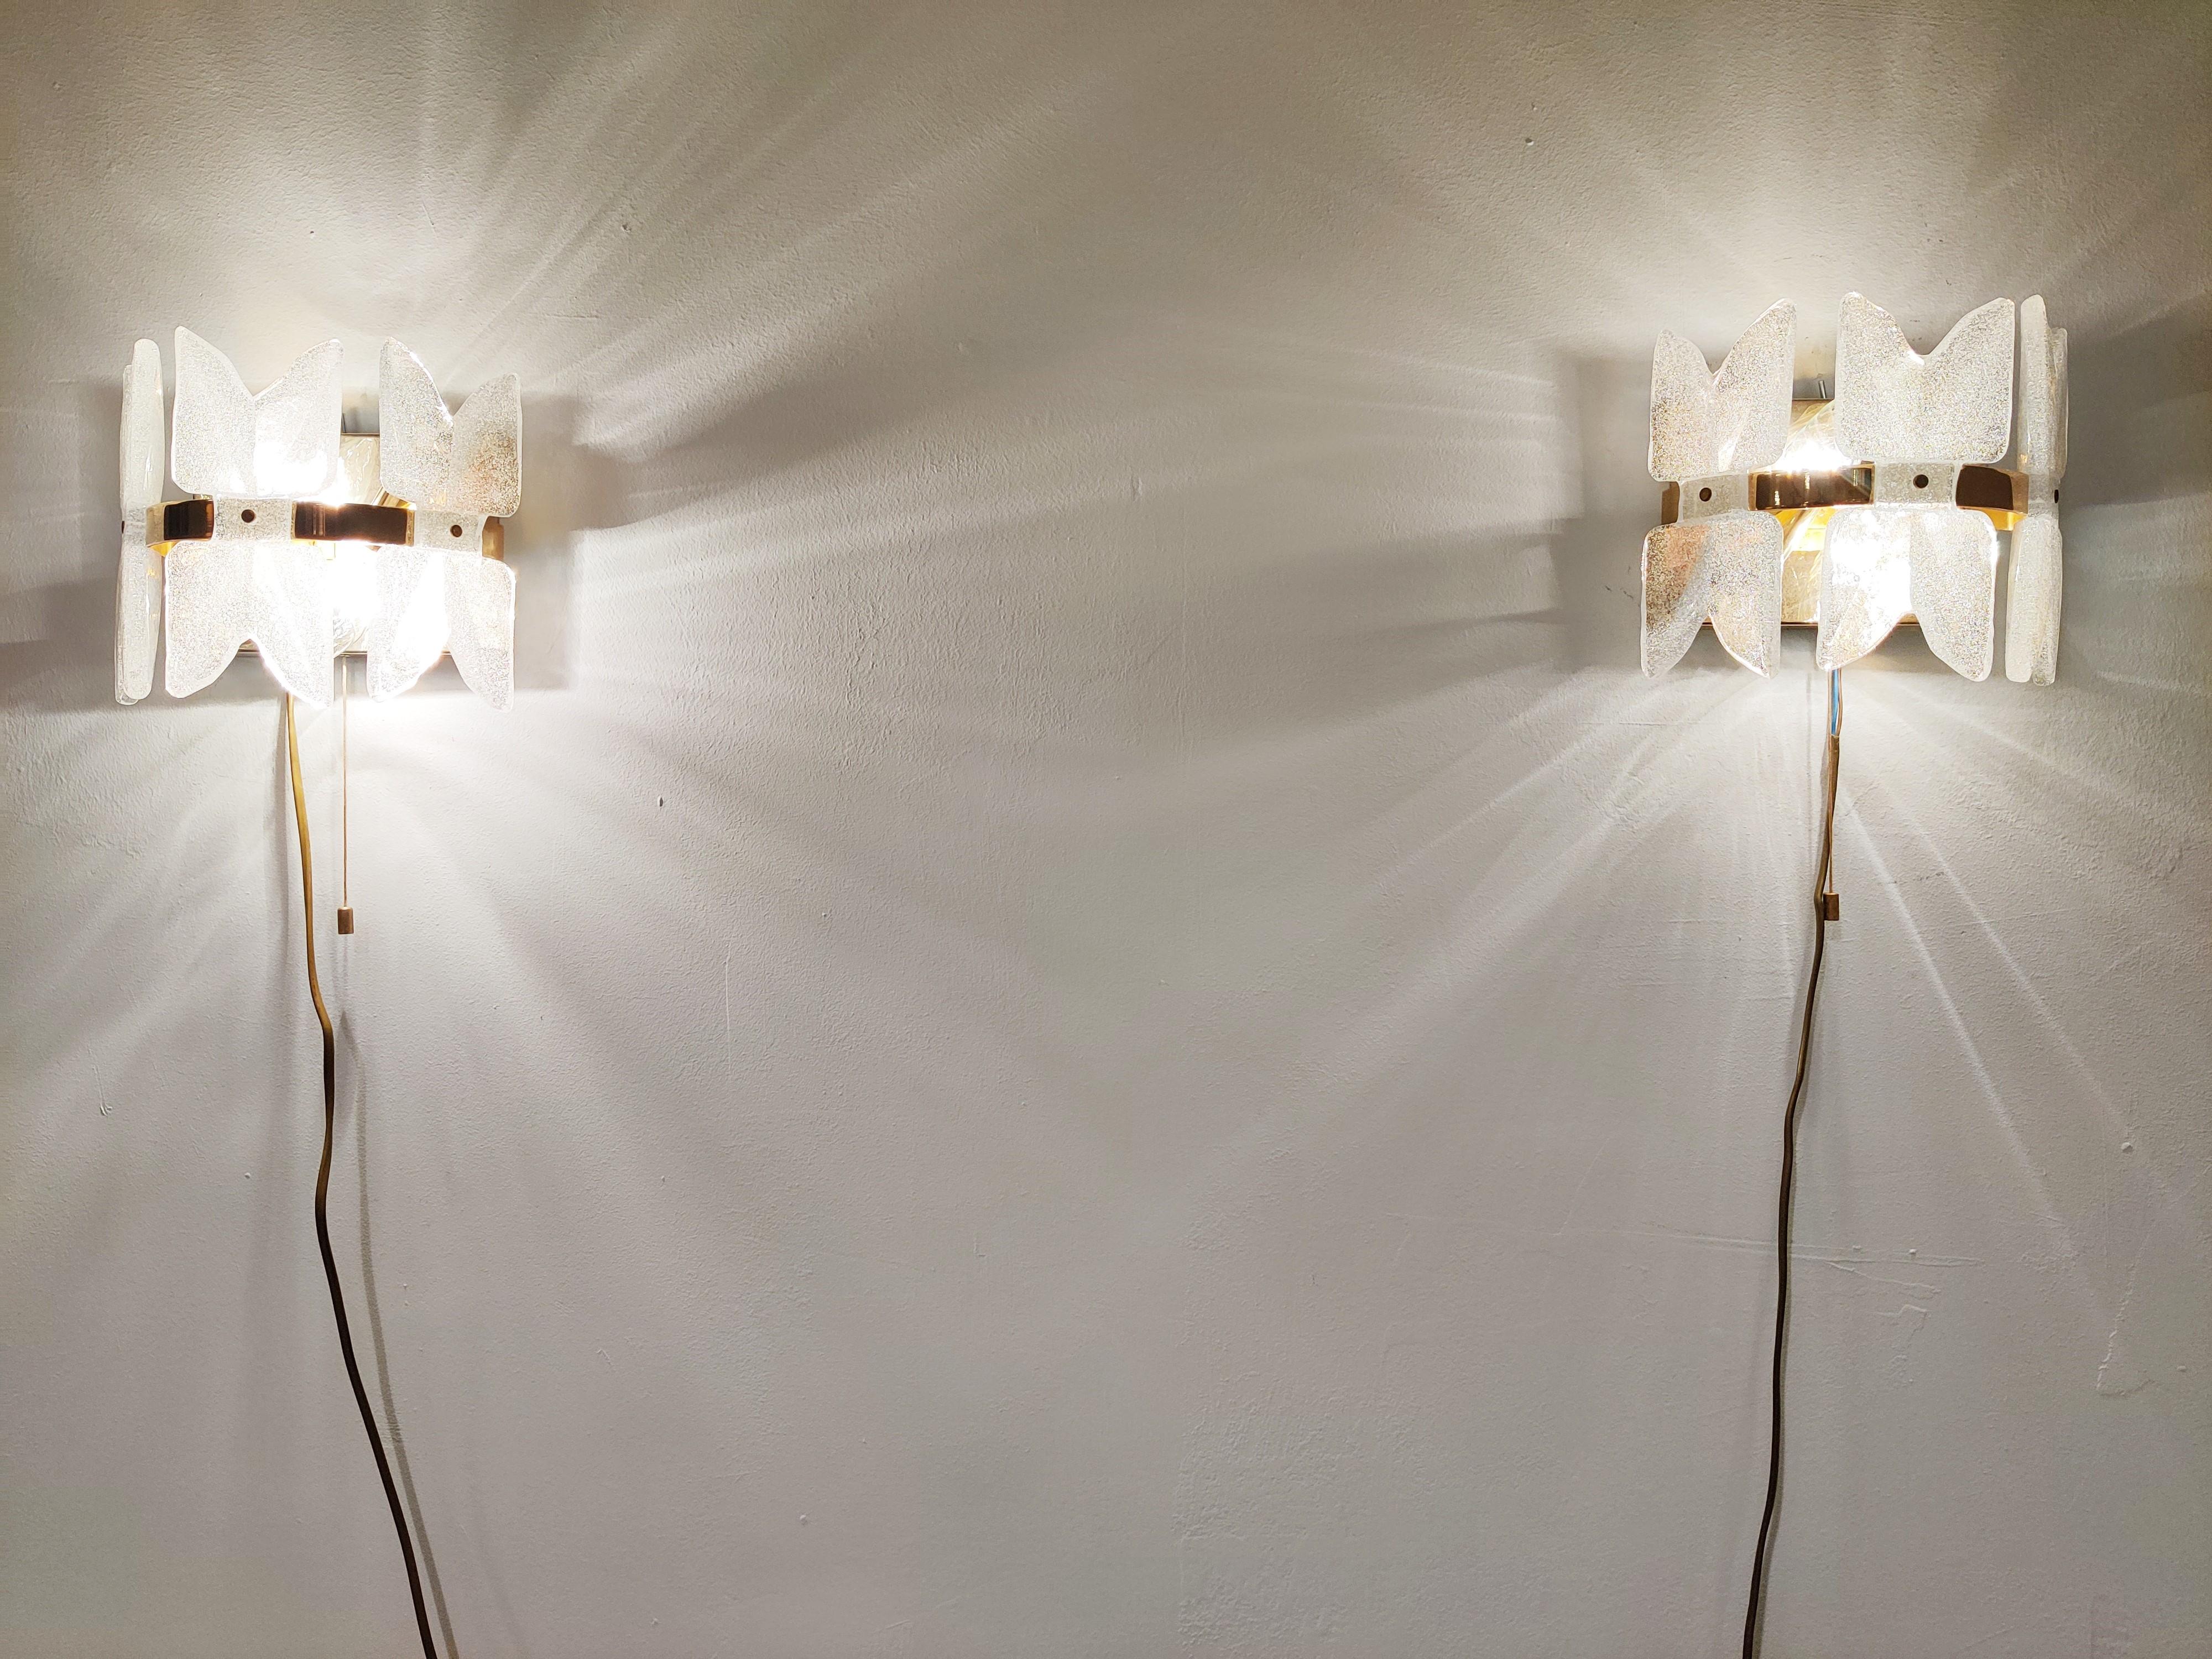 Pair of midcentury brass frosted glass wall lamps by JT kalmar.

The glasses have a sort of butterfly shape design.

The lamps emit a lovely diffuse light.

Very good condition

Original pulling cords.

Labeled

1960s -